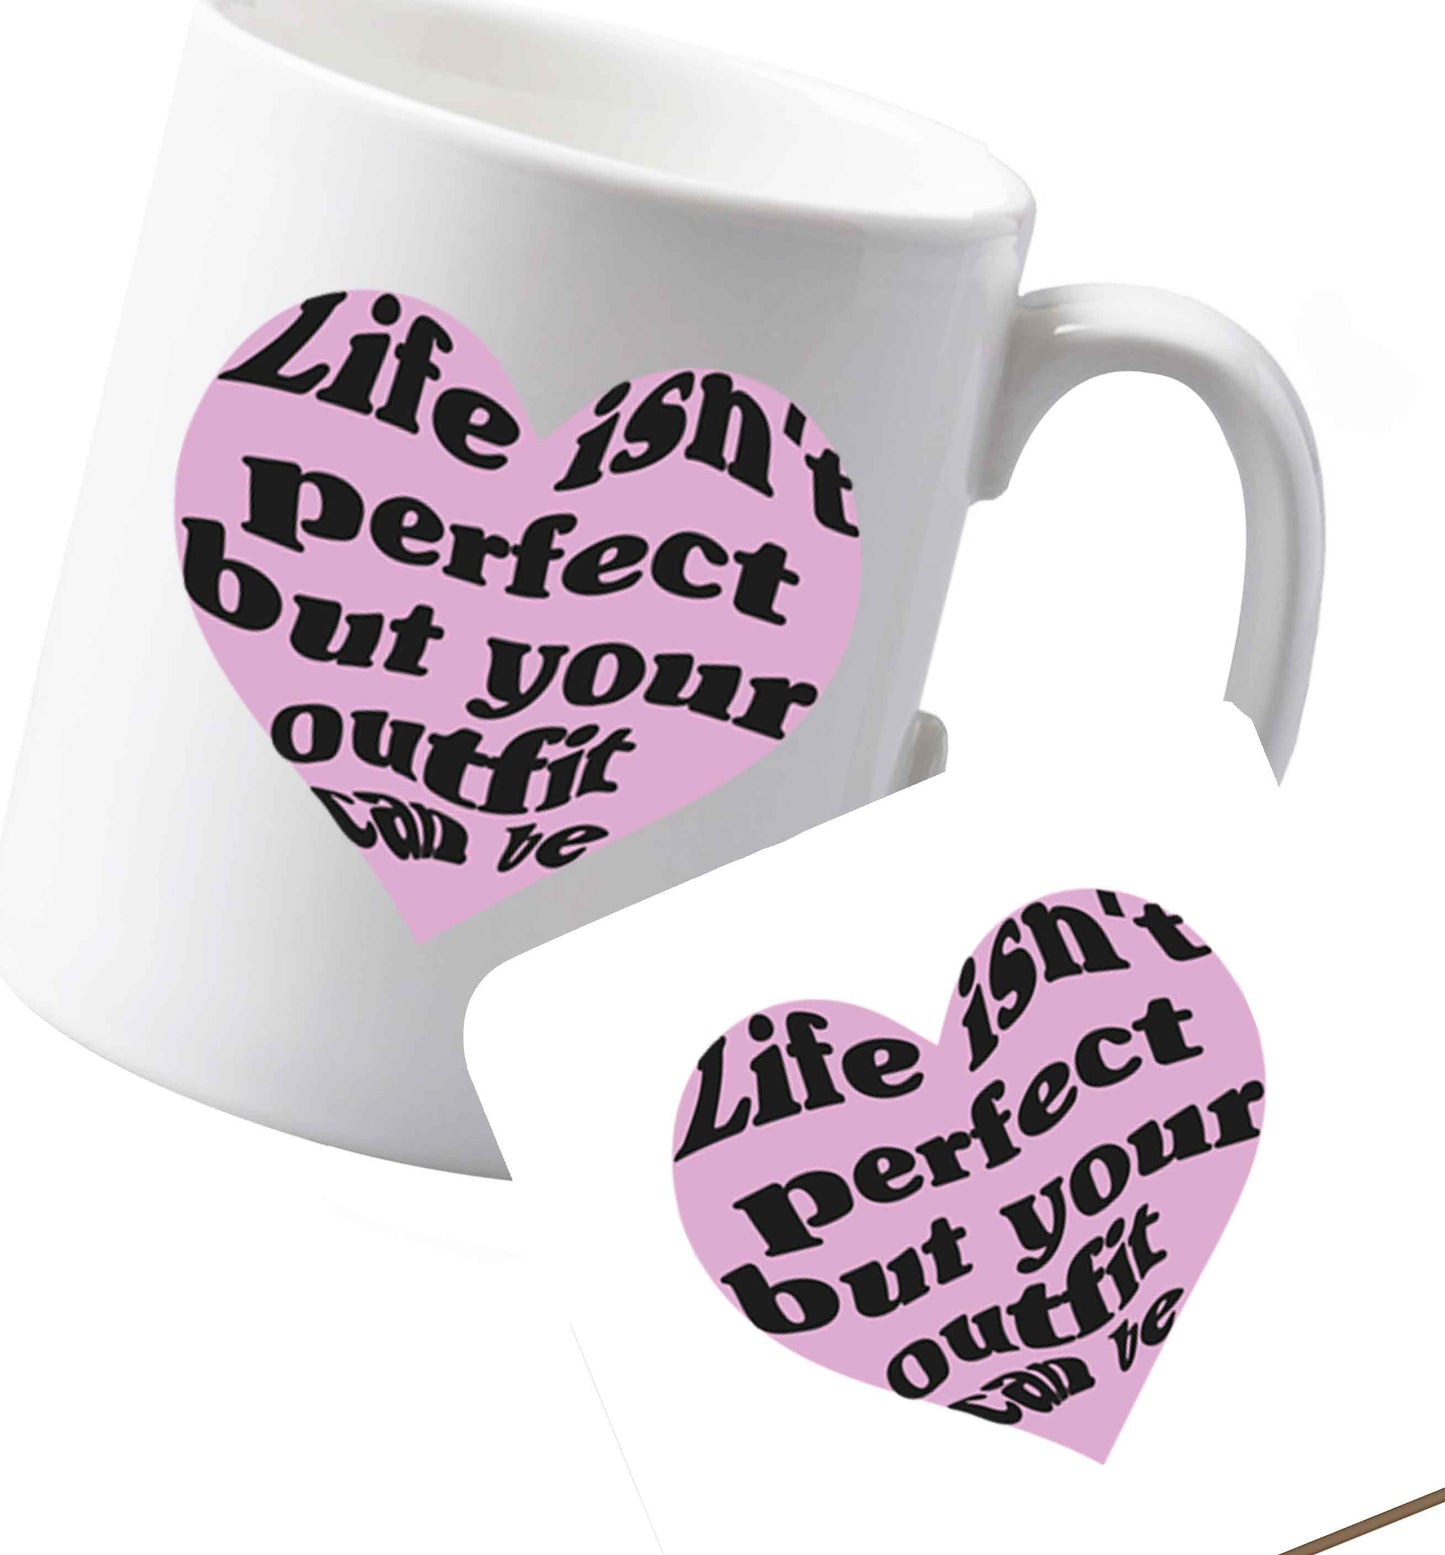 10 oz Ceramic mug and coaster Life isn't perfect but your outfit can be  both sides